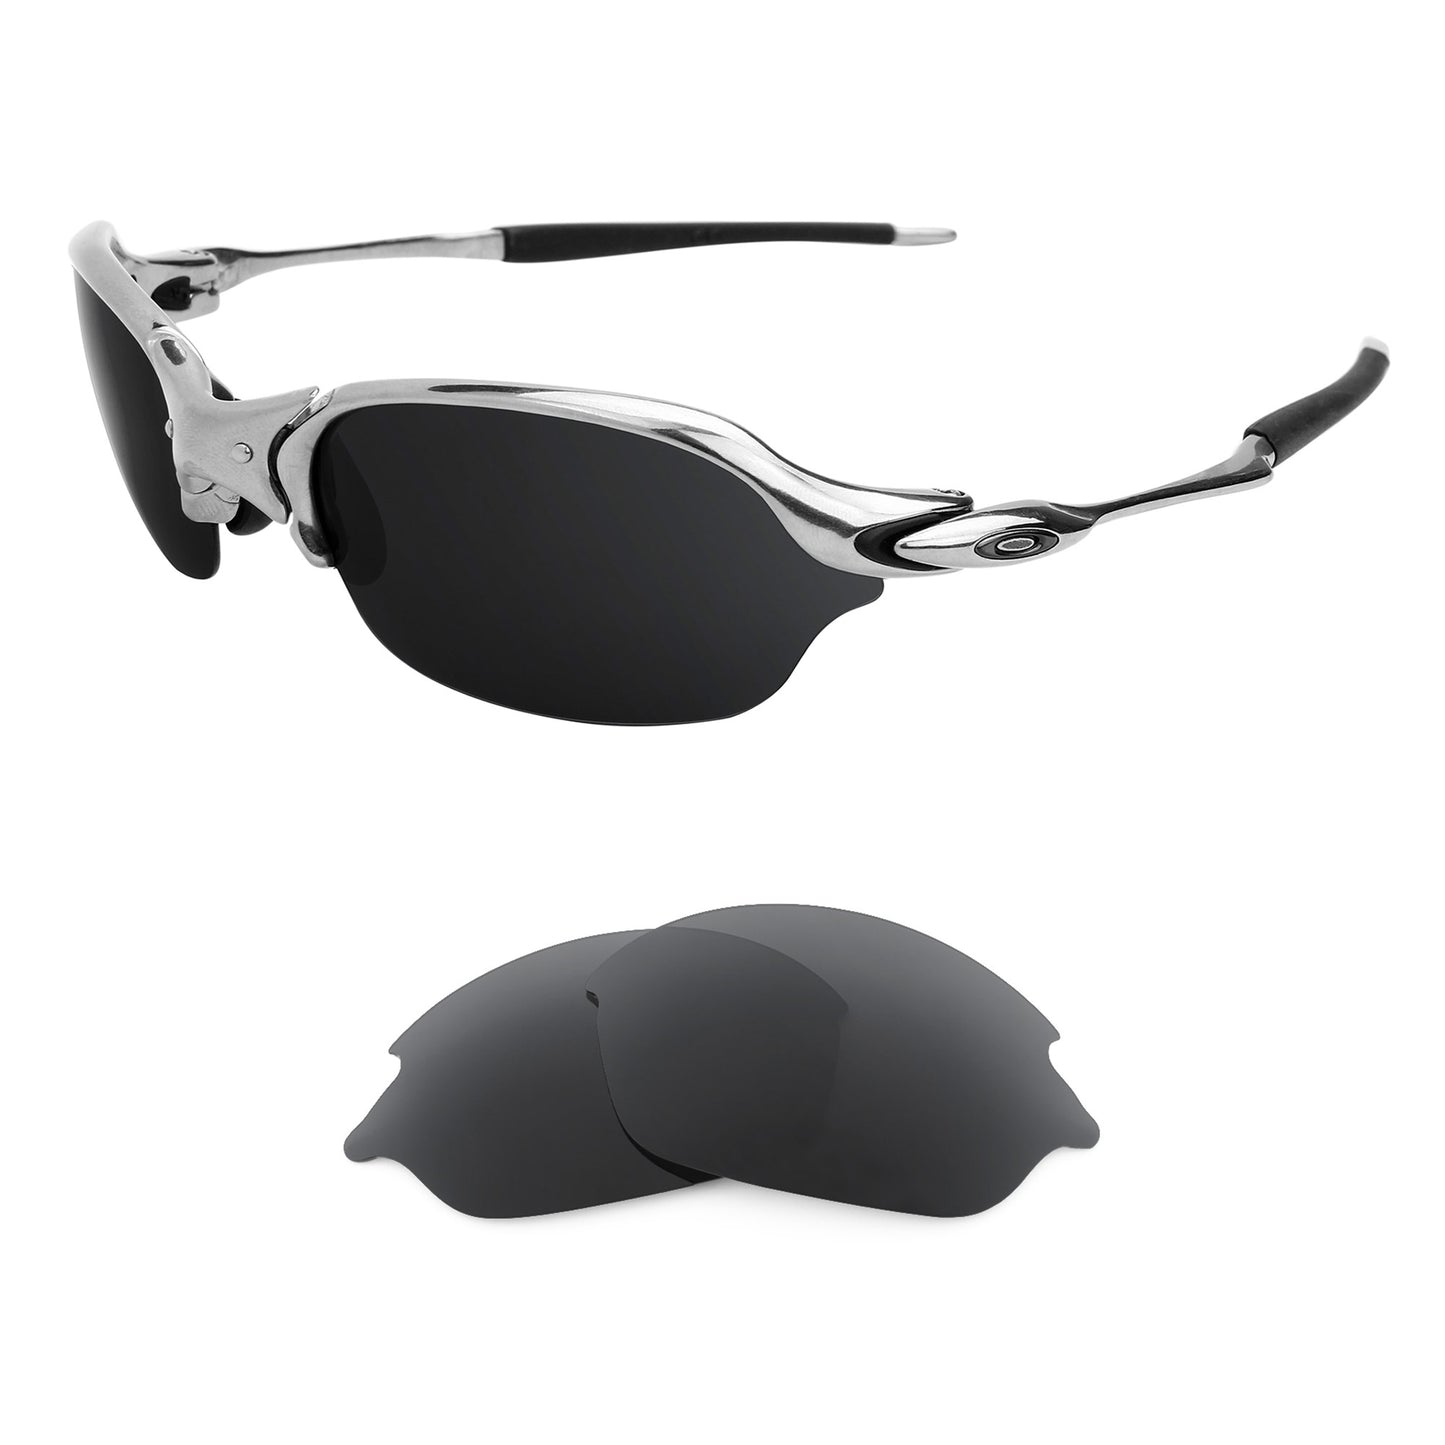 Oakley Romeo 2 sunglasses with replacement lenses